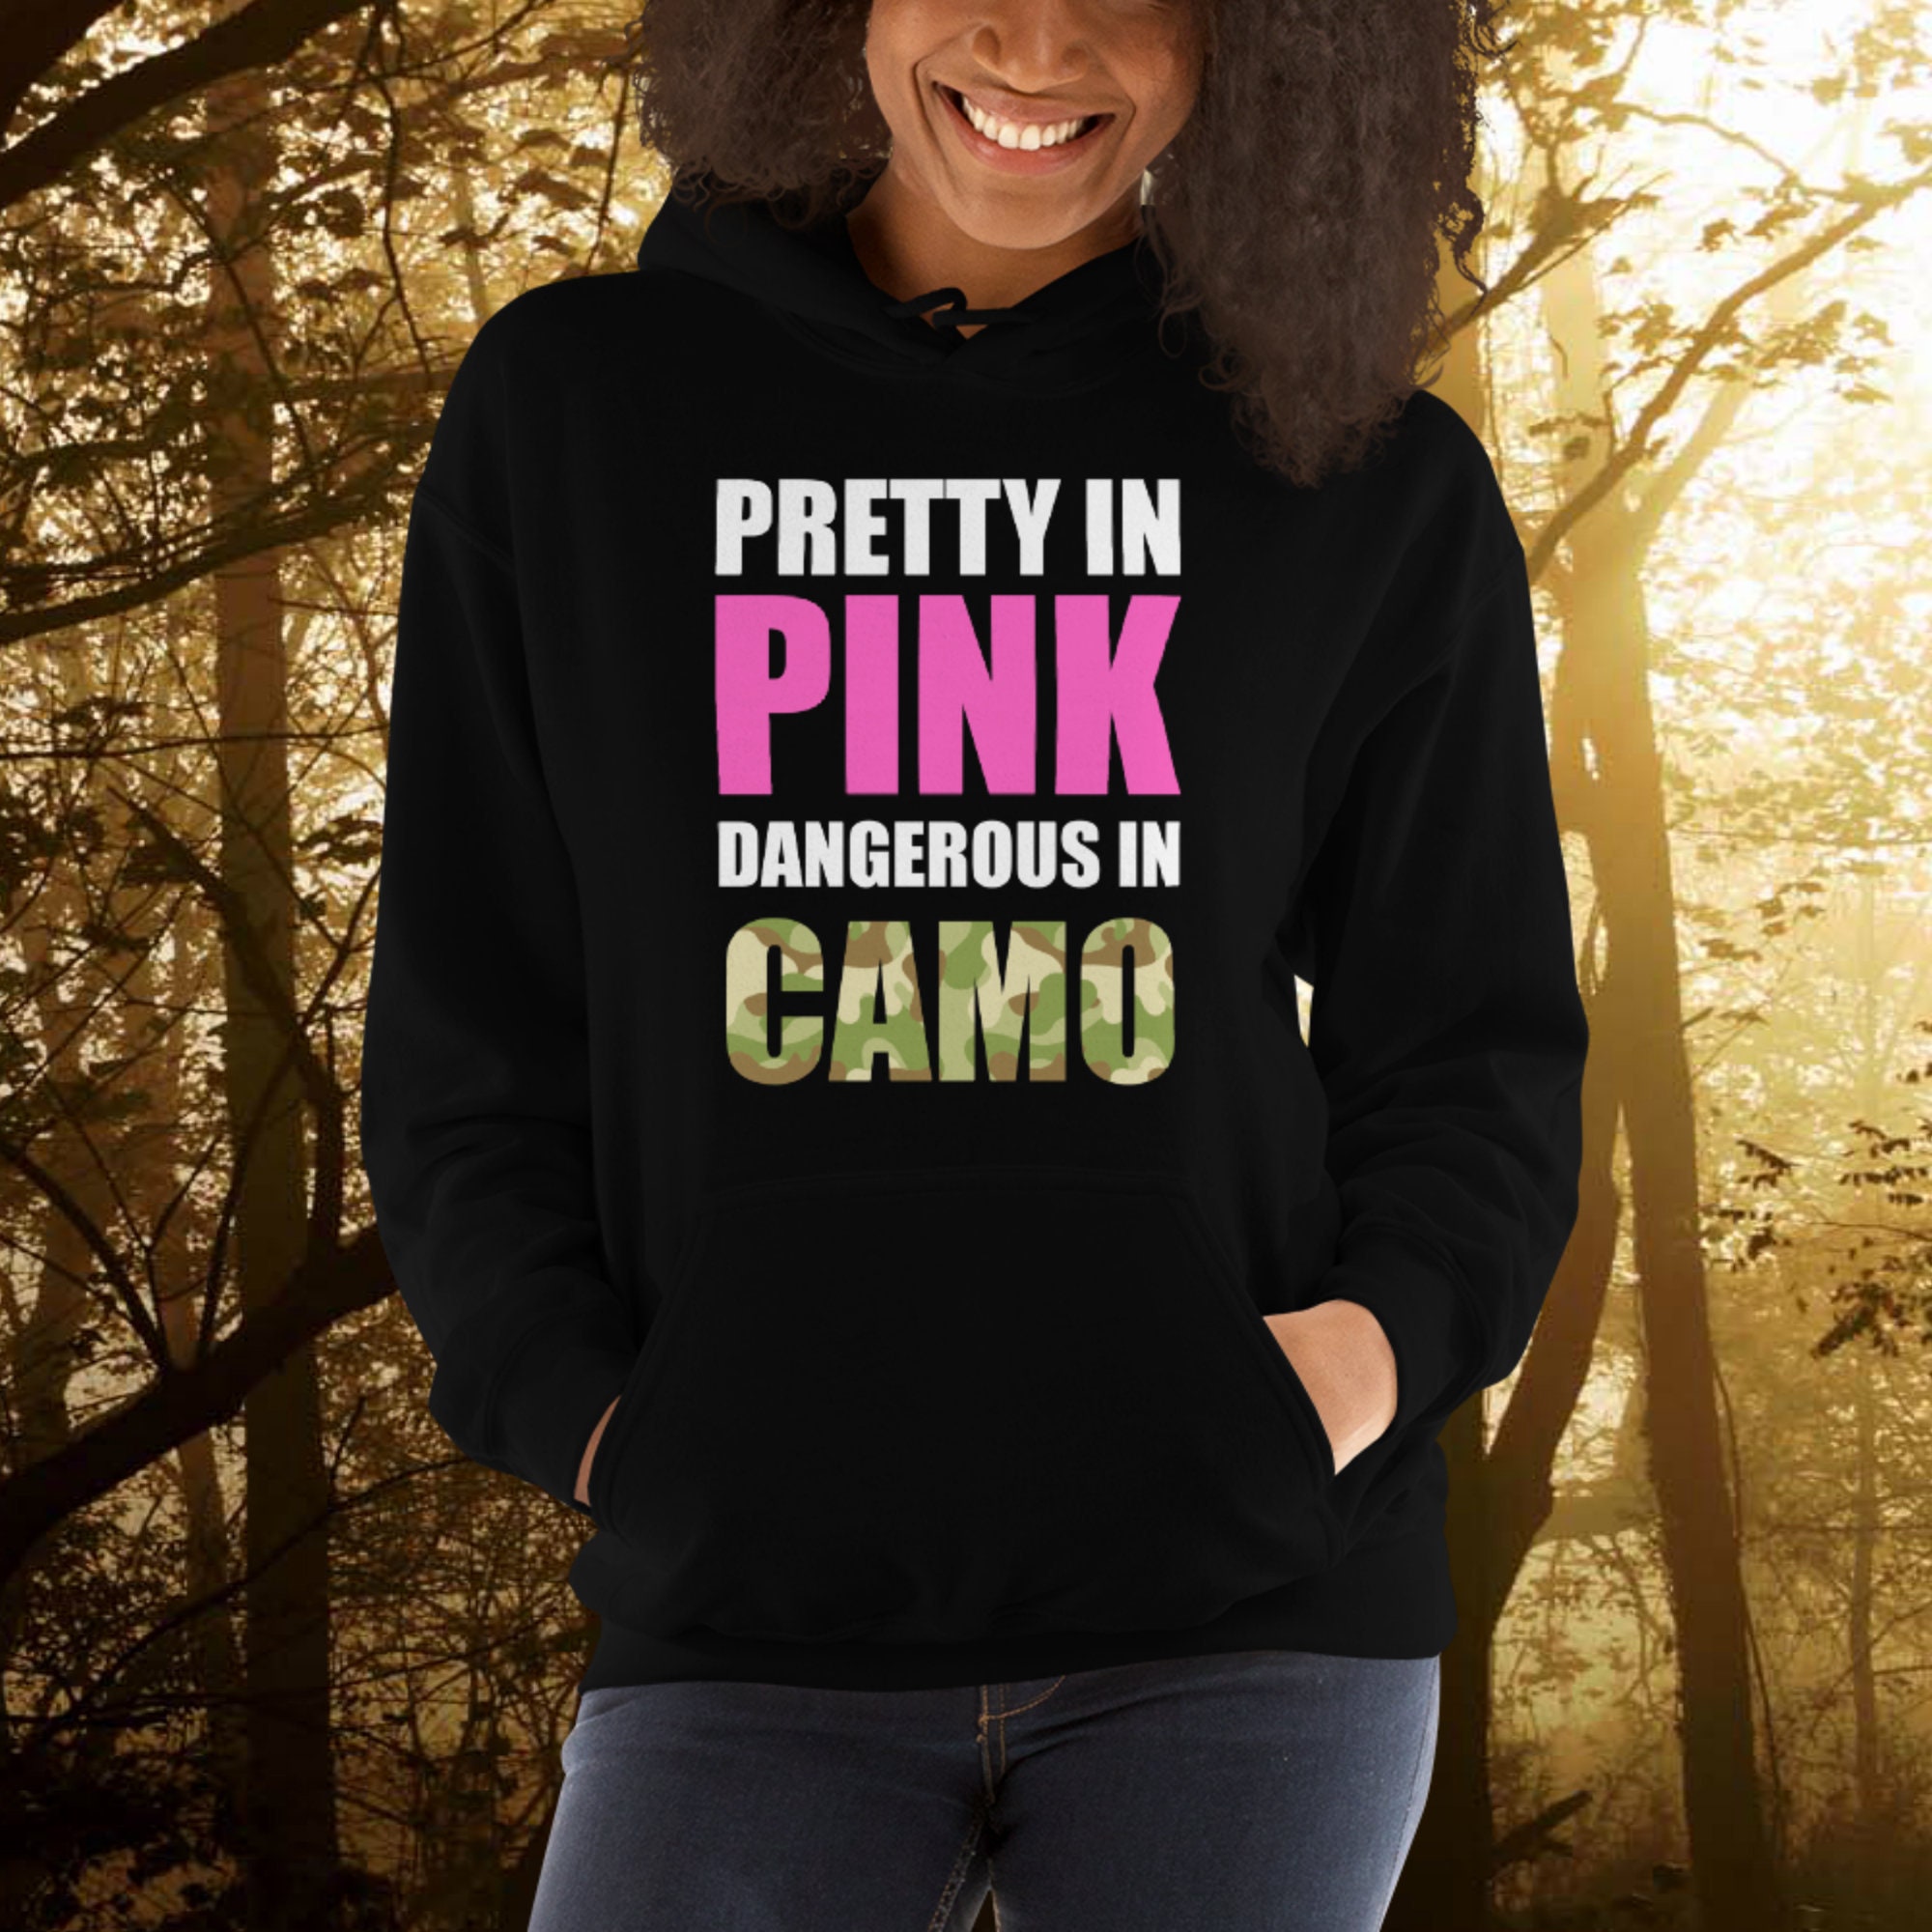 Pretty in Pink Dangerous in Camo Unisex Sweatshirt Hoodie, Camouflage Tee,  Camo Gift, Military Outdoor Adult Sweater, Camo Clothing 